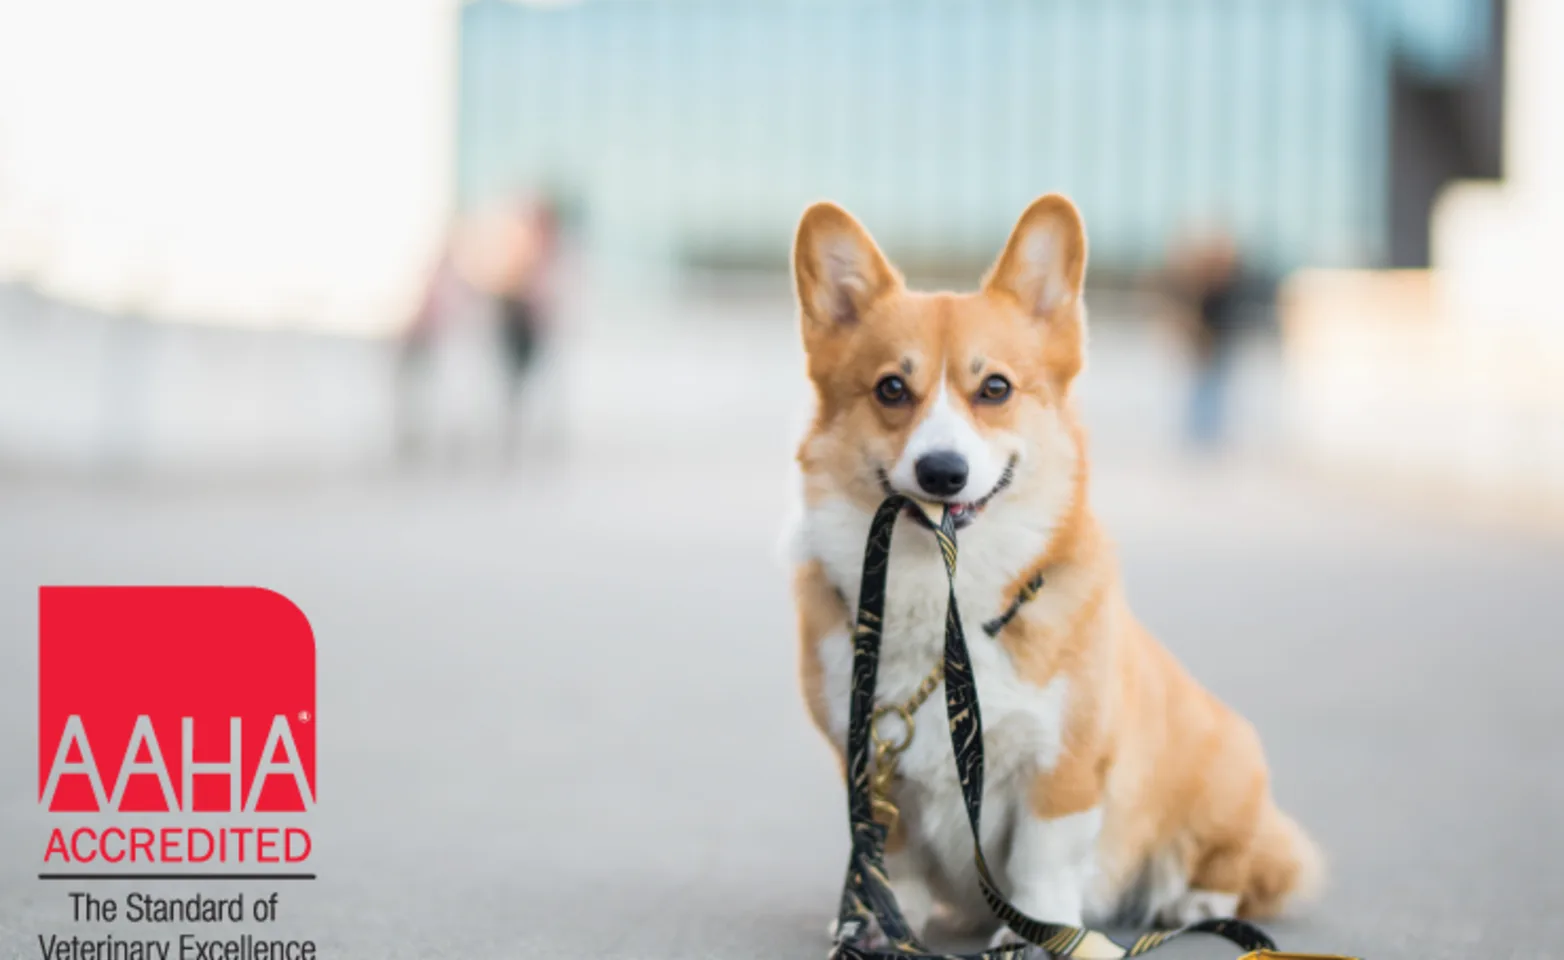 Corgi holding a leash in their mouth with a blurry background